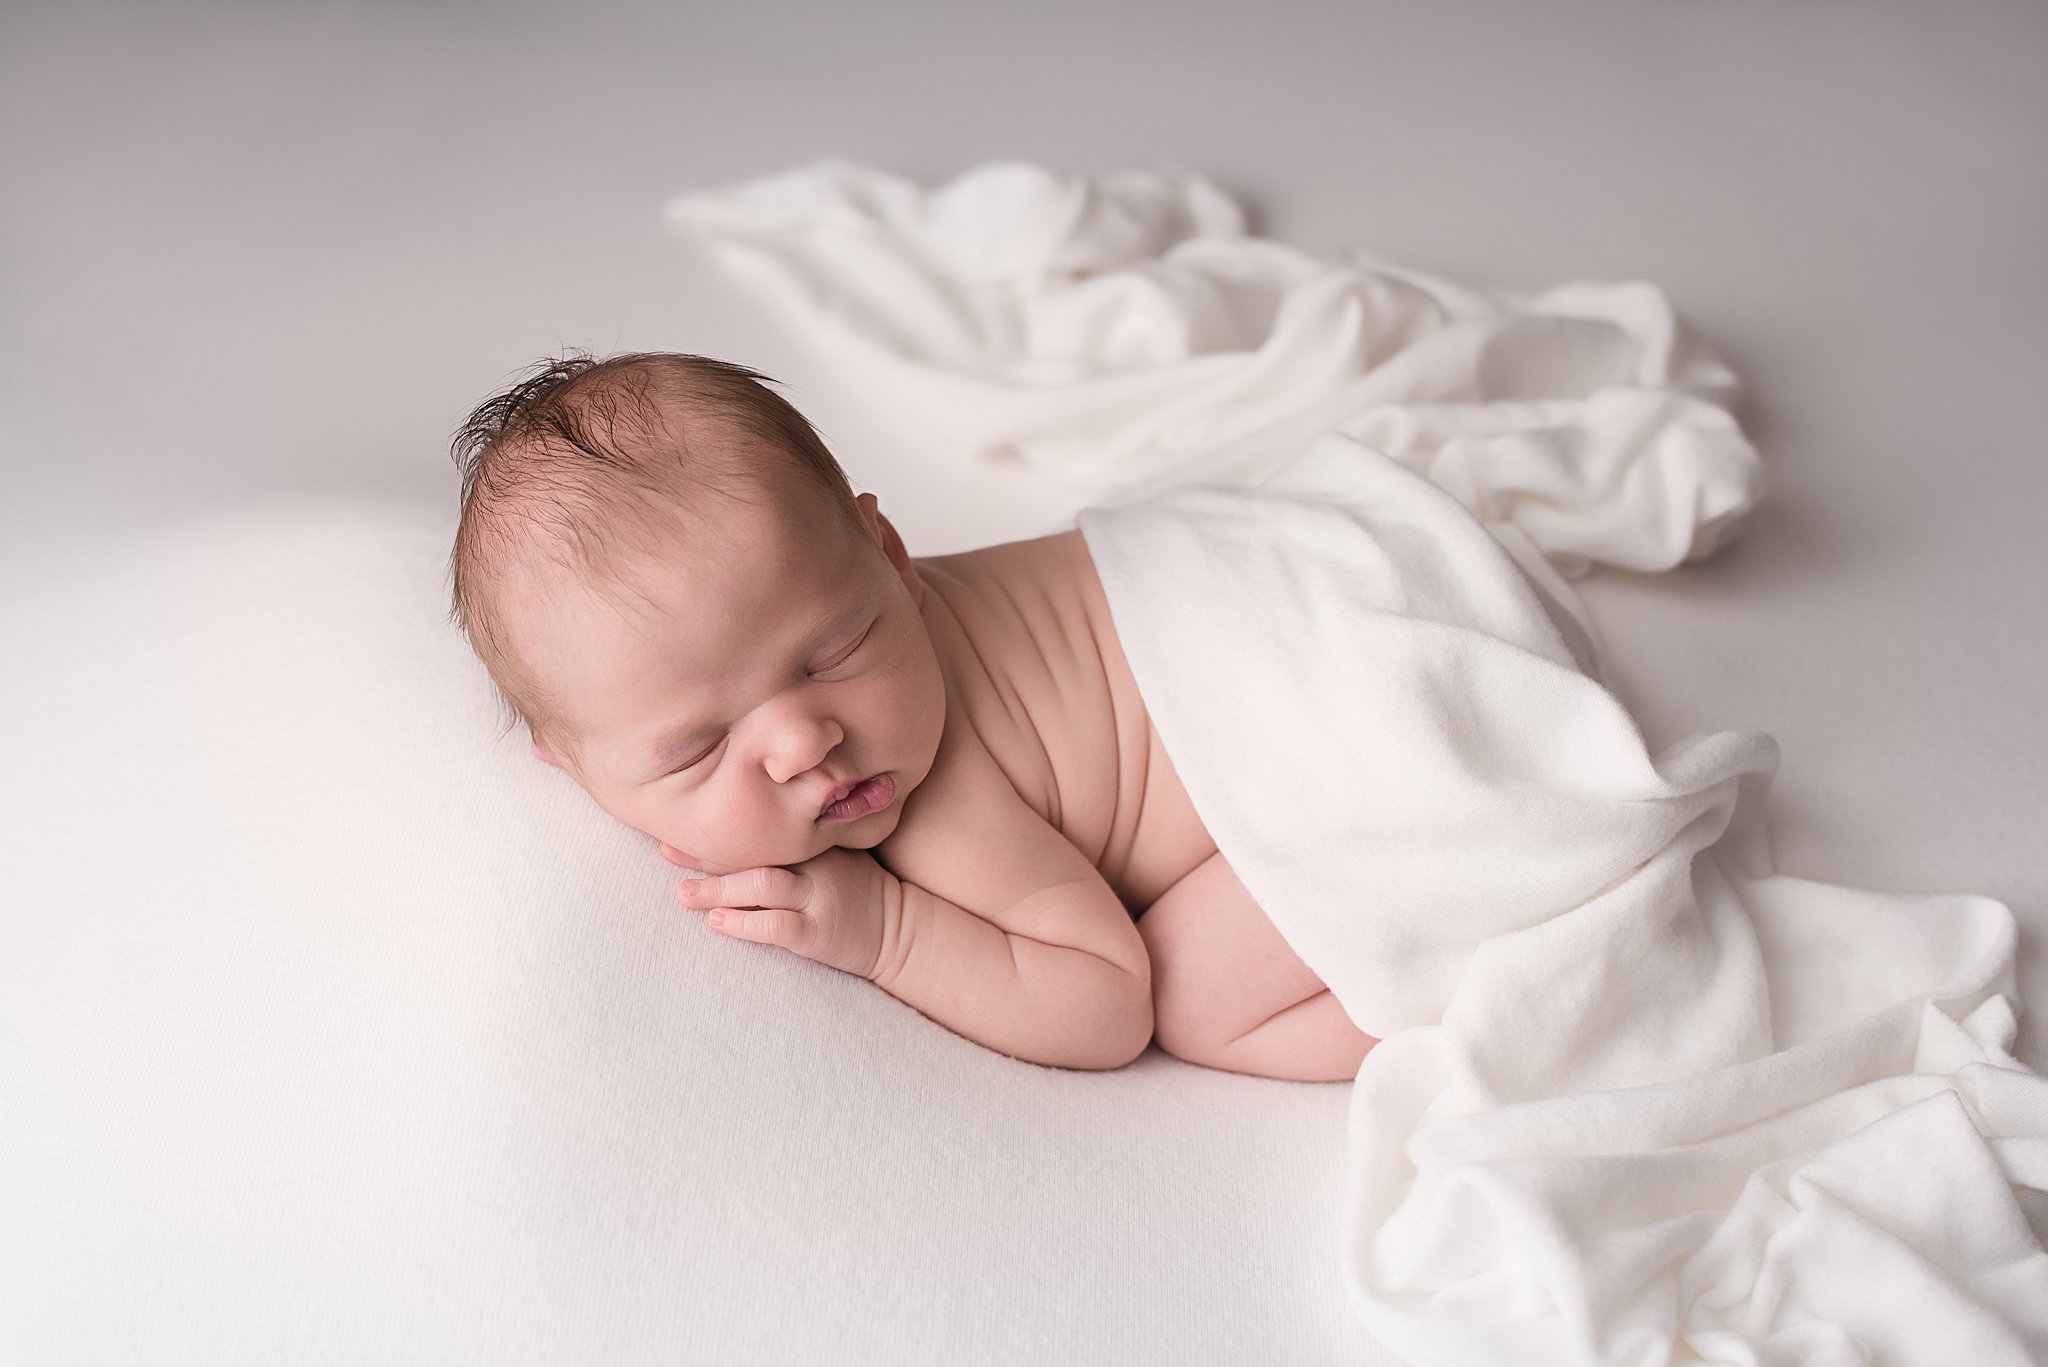 A newborn baby sleeps on a white bed with a white blanket draped over